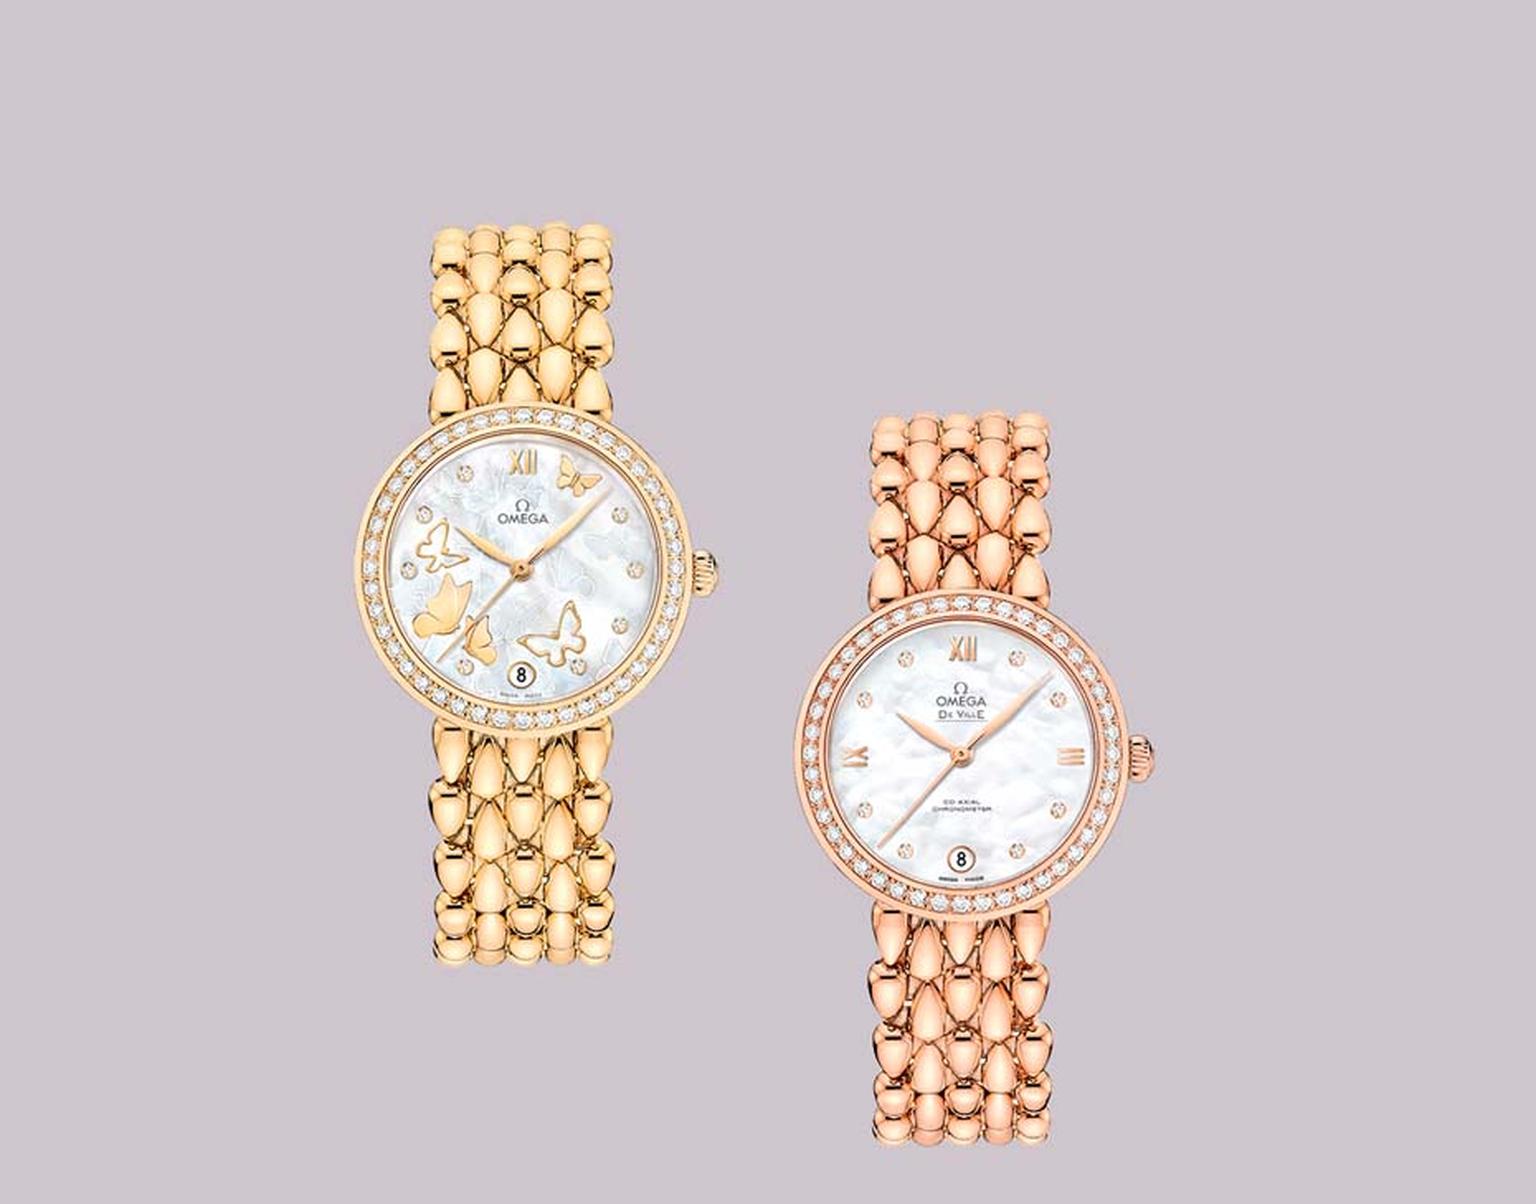 Omega watches De Ville Prestige collection welcomes the new Dewdrop watch with a glamorous rose or yellow gold bracelet shaped like dewdrop beads.